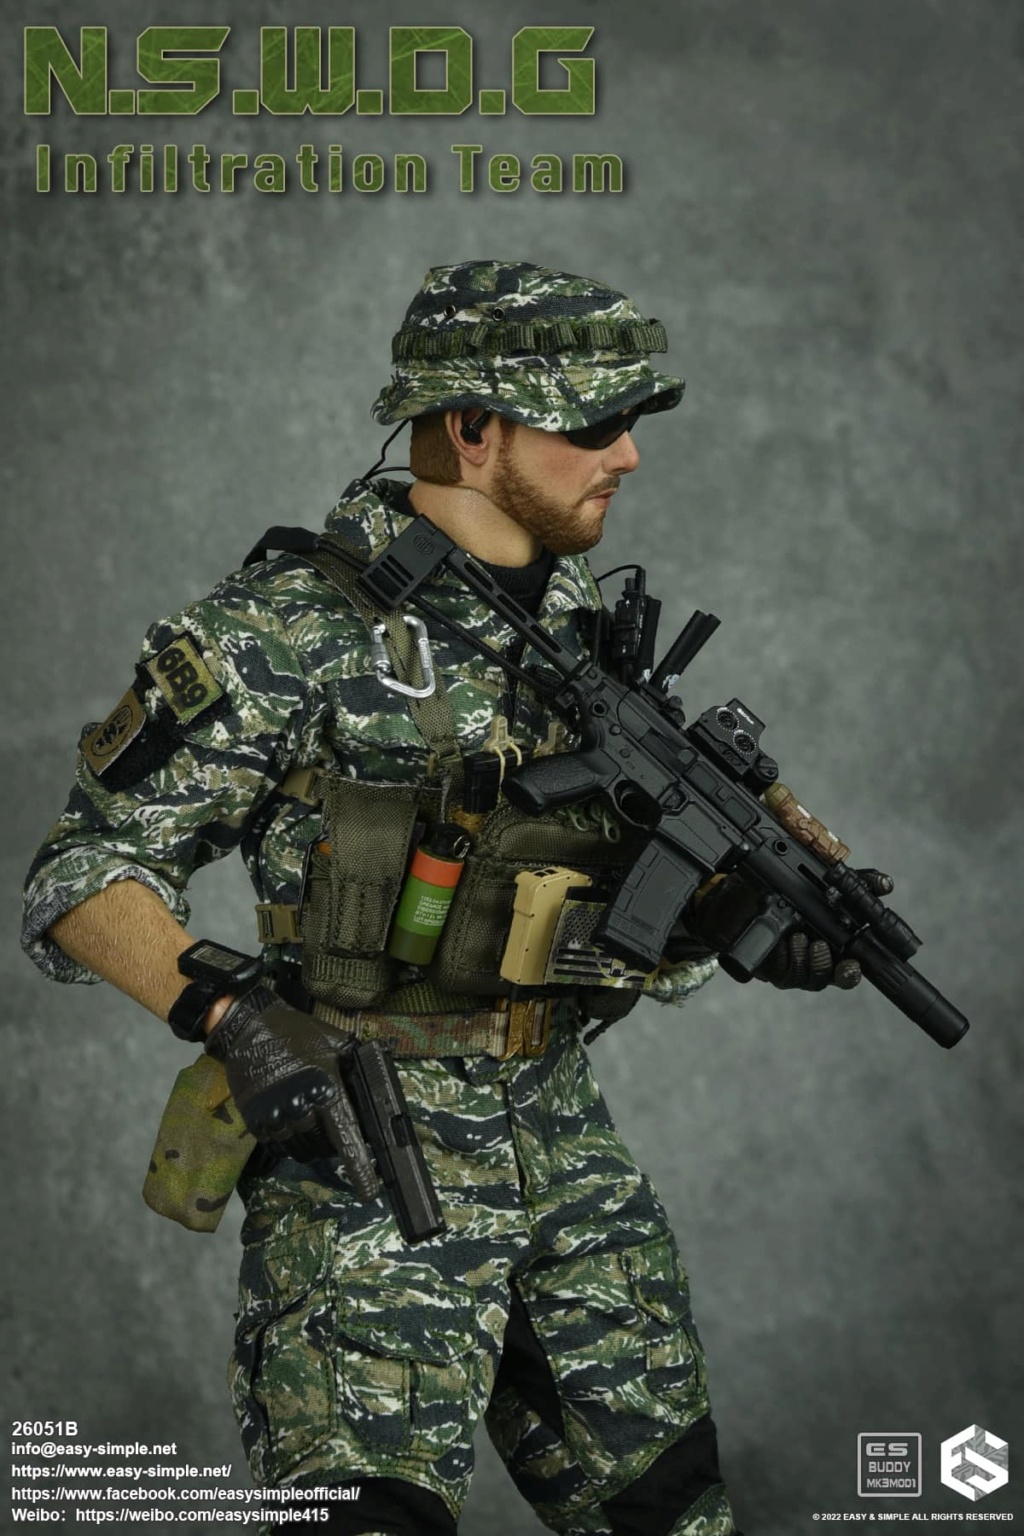 NEW PRODUCT: EASY AND SIMPLE 1/6 SCALE FIGURE: N.S.W.D.G INFILTRATION TEAM - (2 Versions) 10530